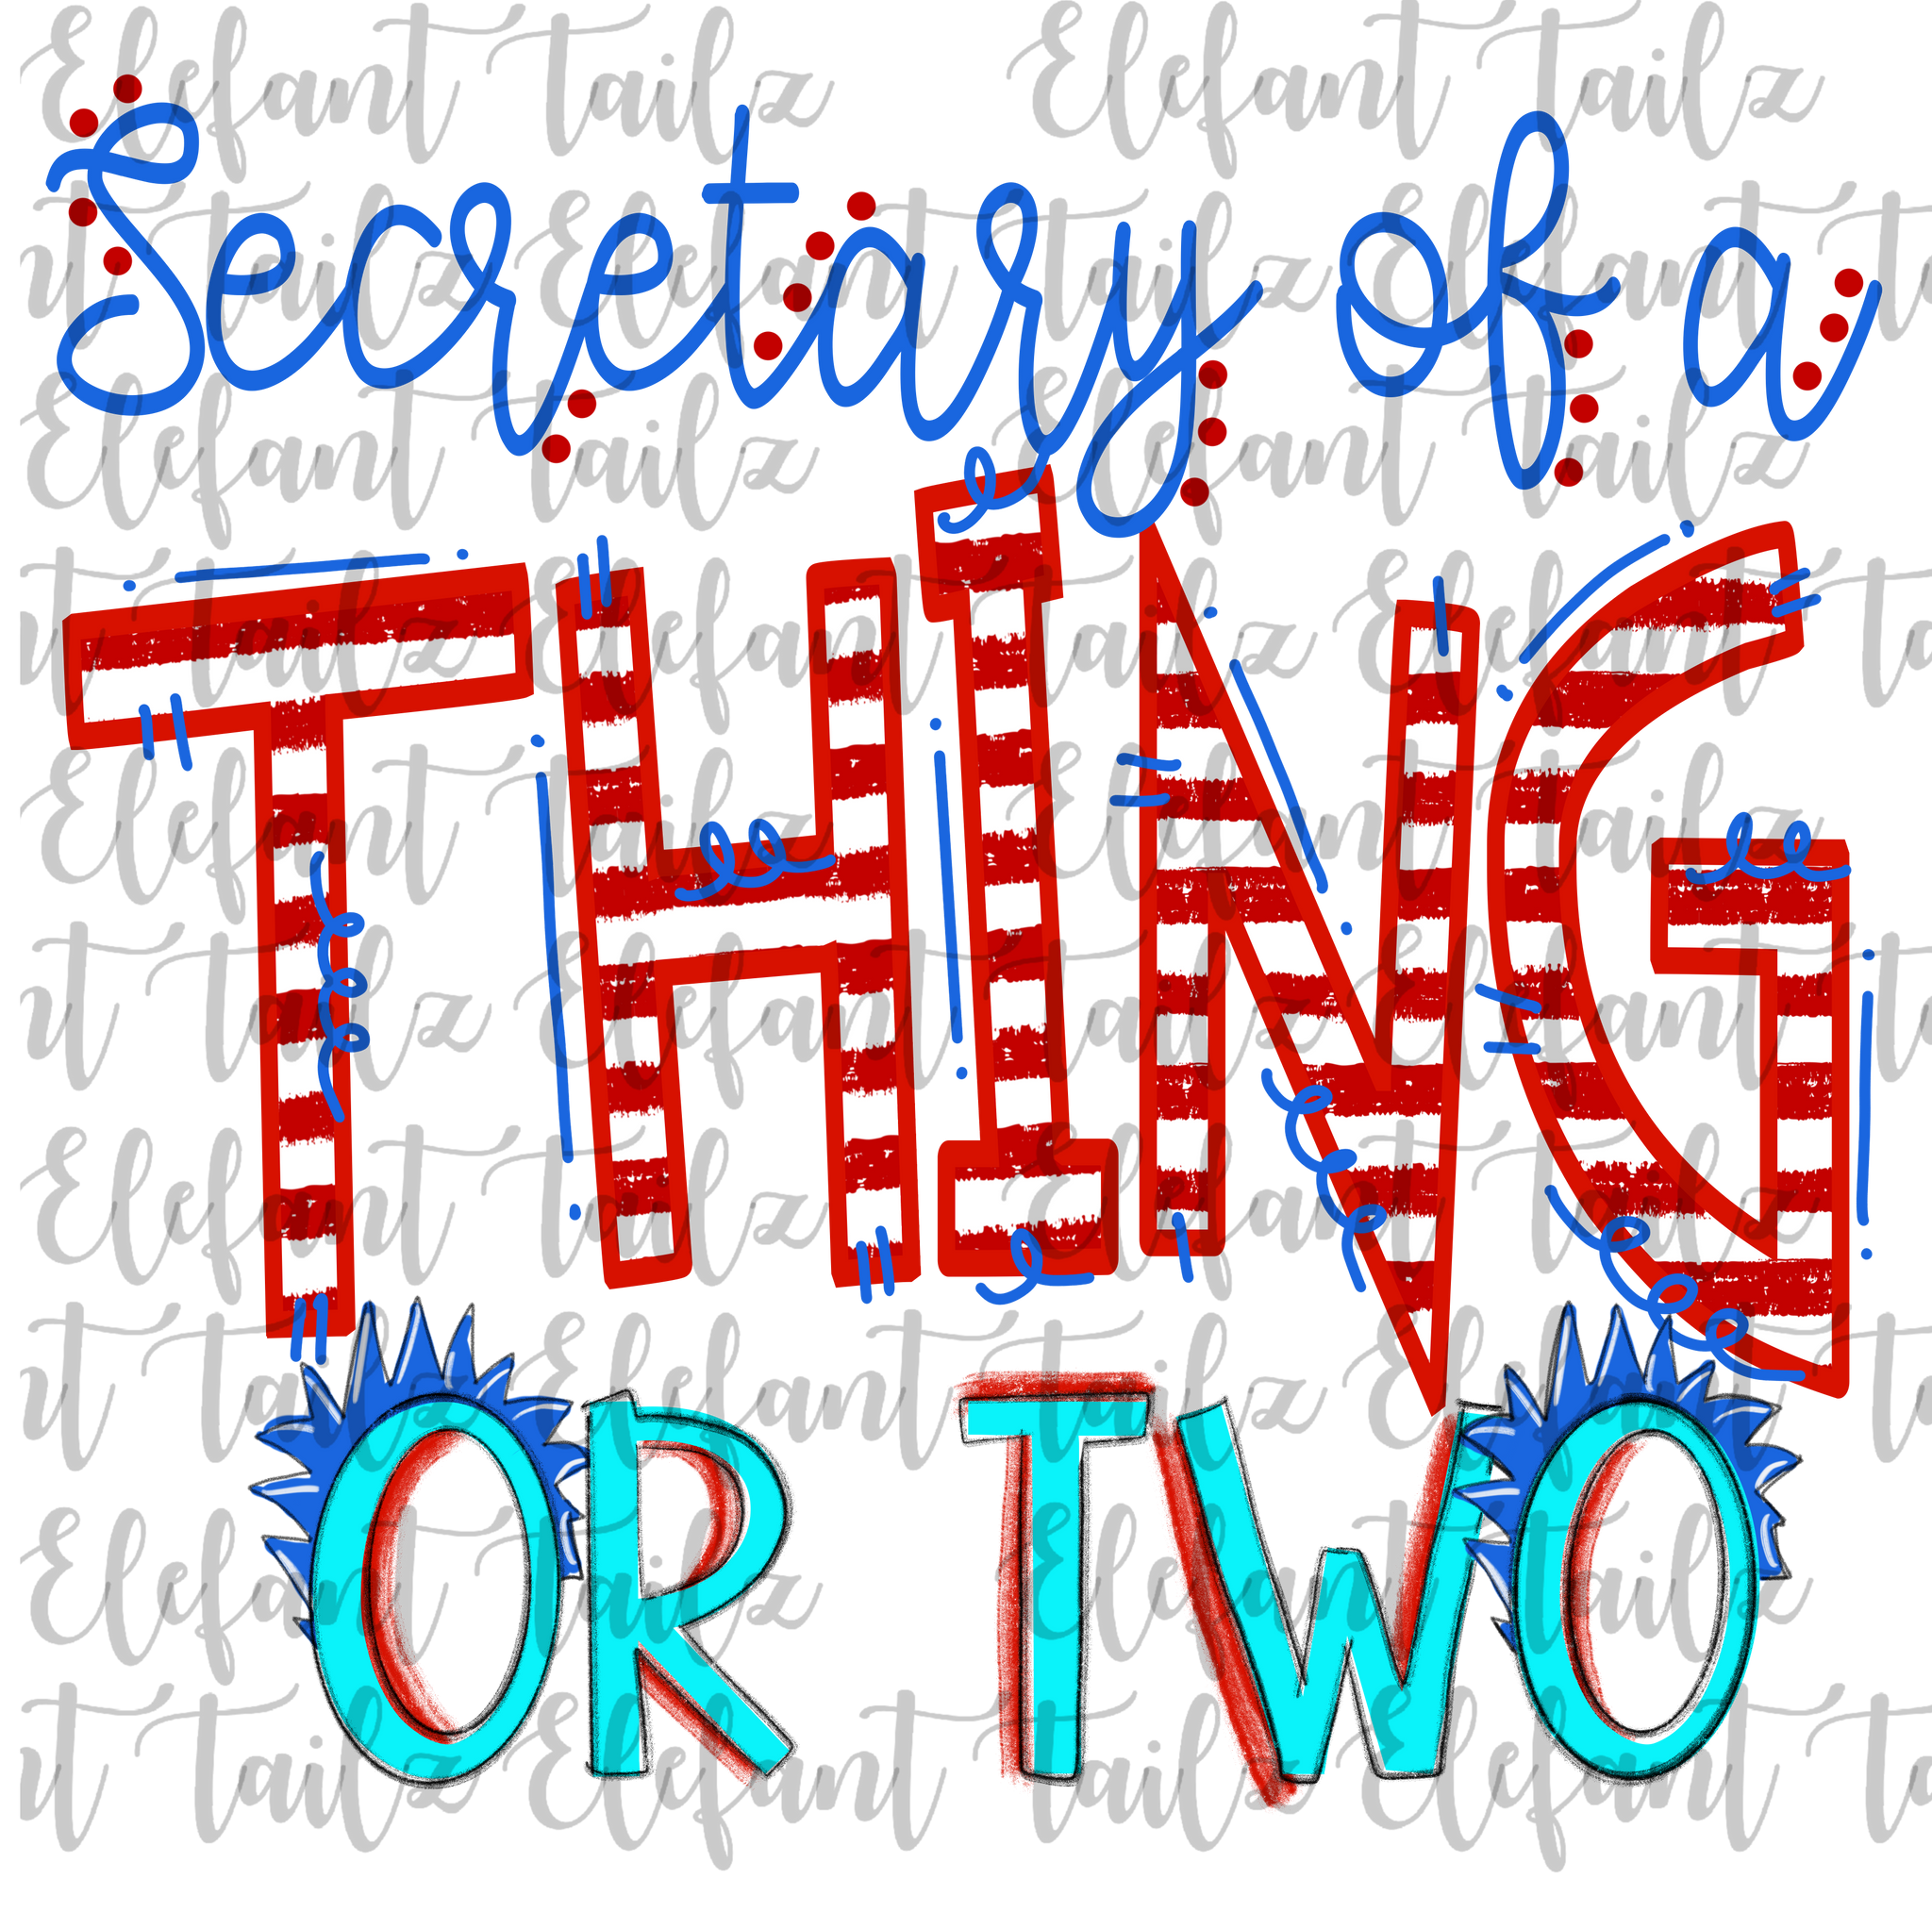 Secretary of a Thing or Two